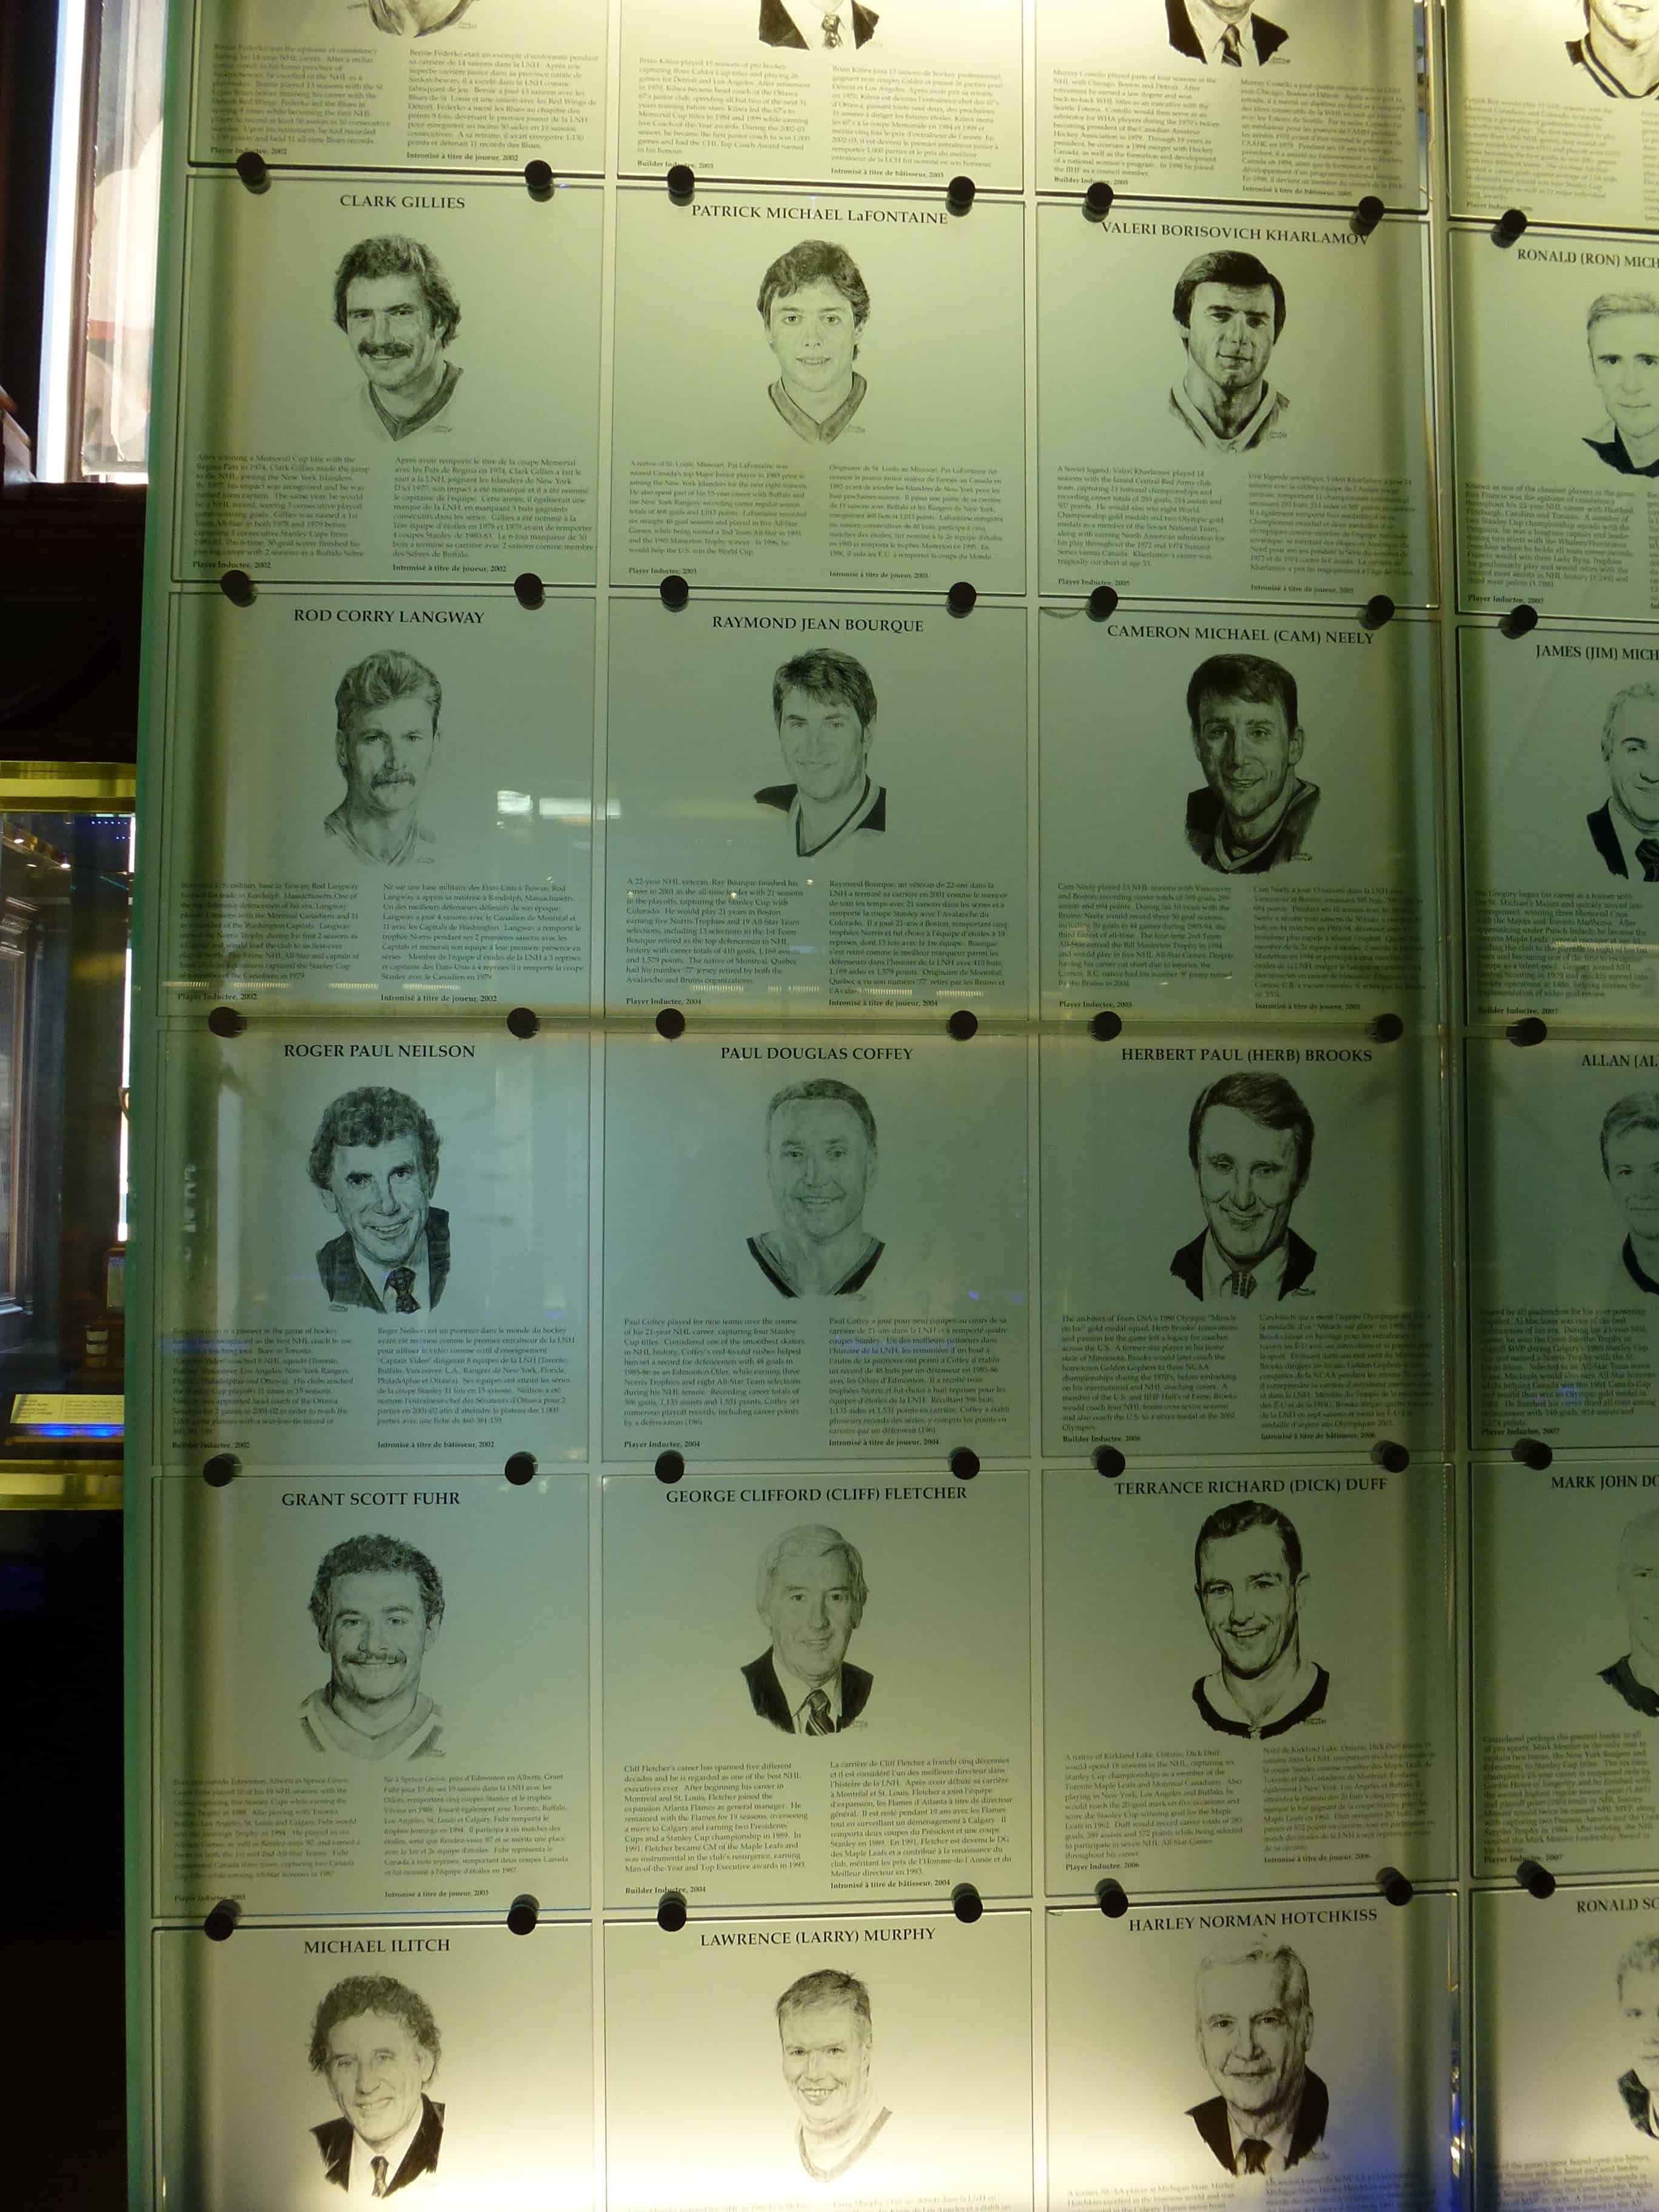 Hockey Hall of Fame inductees at the Hockey Hall of Fame in Toronto, Ontario, Canada